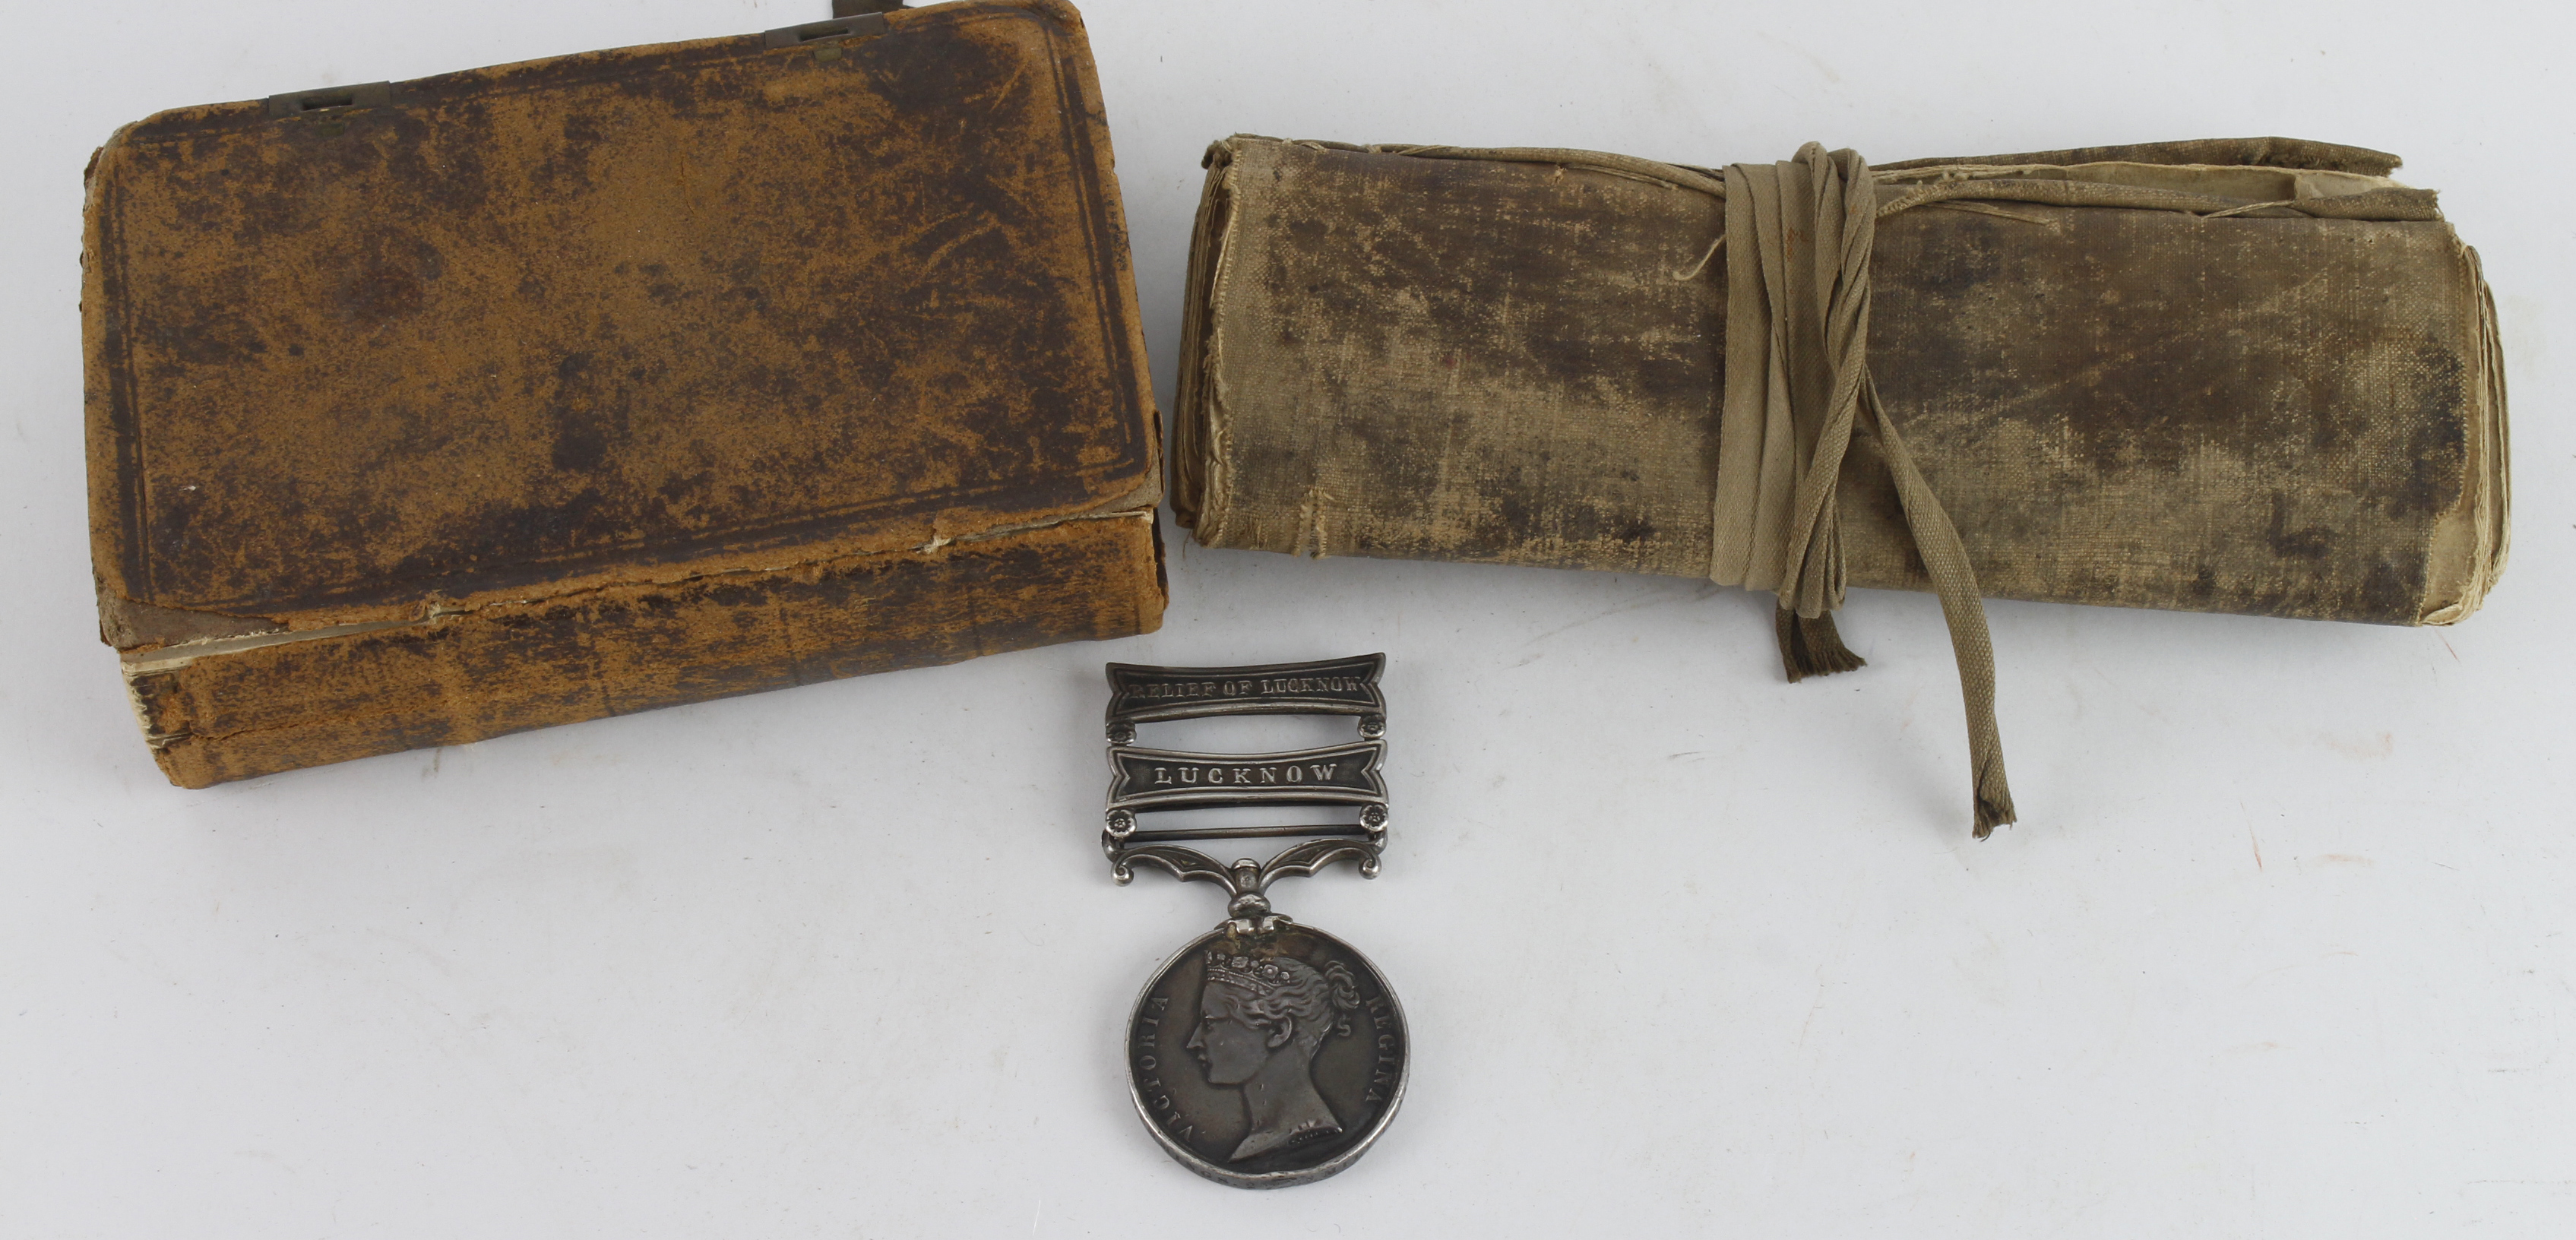 Indian Mutiny Medal with bars Lucknow / Relief of Lucknow (E. Hemmings. 2nd Bn Mily Train), clasp